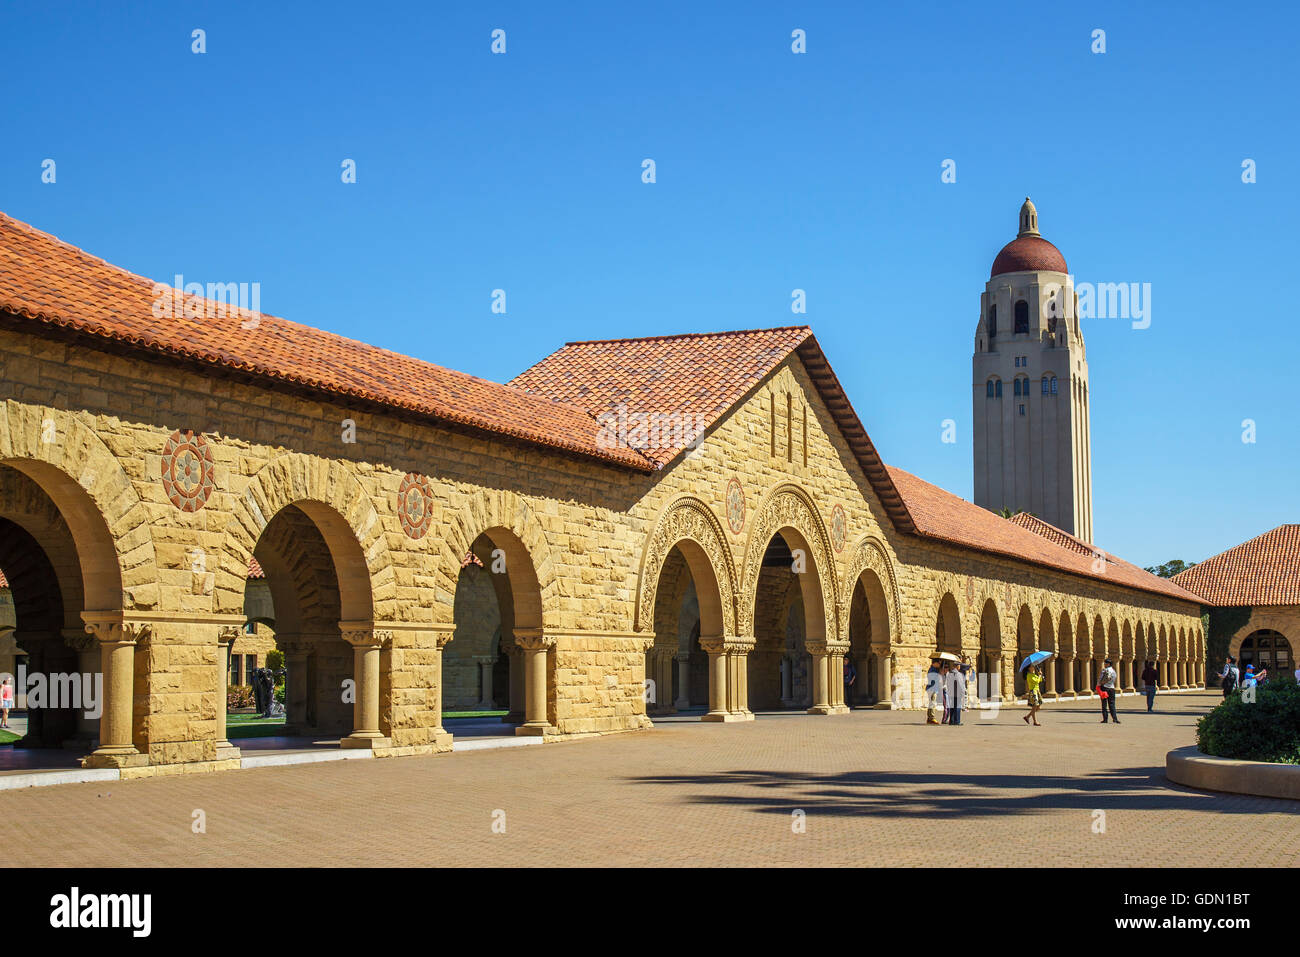 Arched Sandstone and Tile Roof Buildings on the Stanford Main Quad with Hoover Tower in the background a Sunny Cloudless day Stock Photo